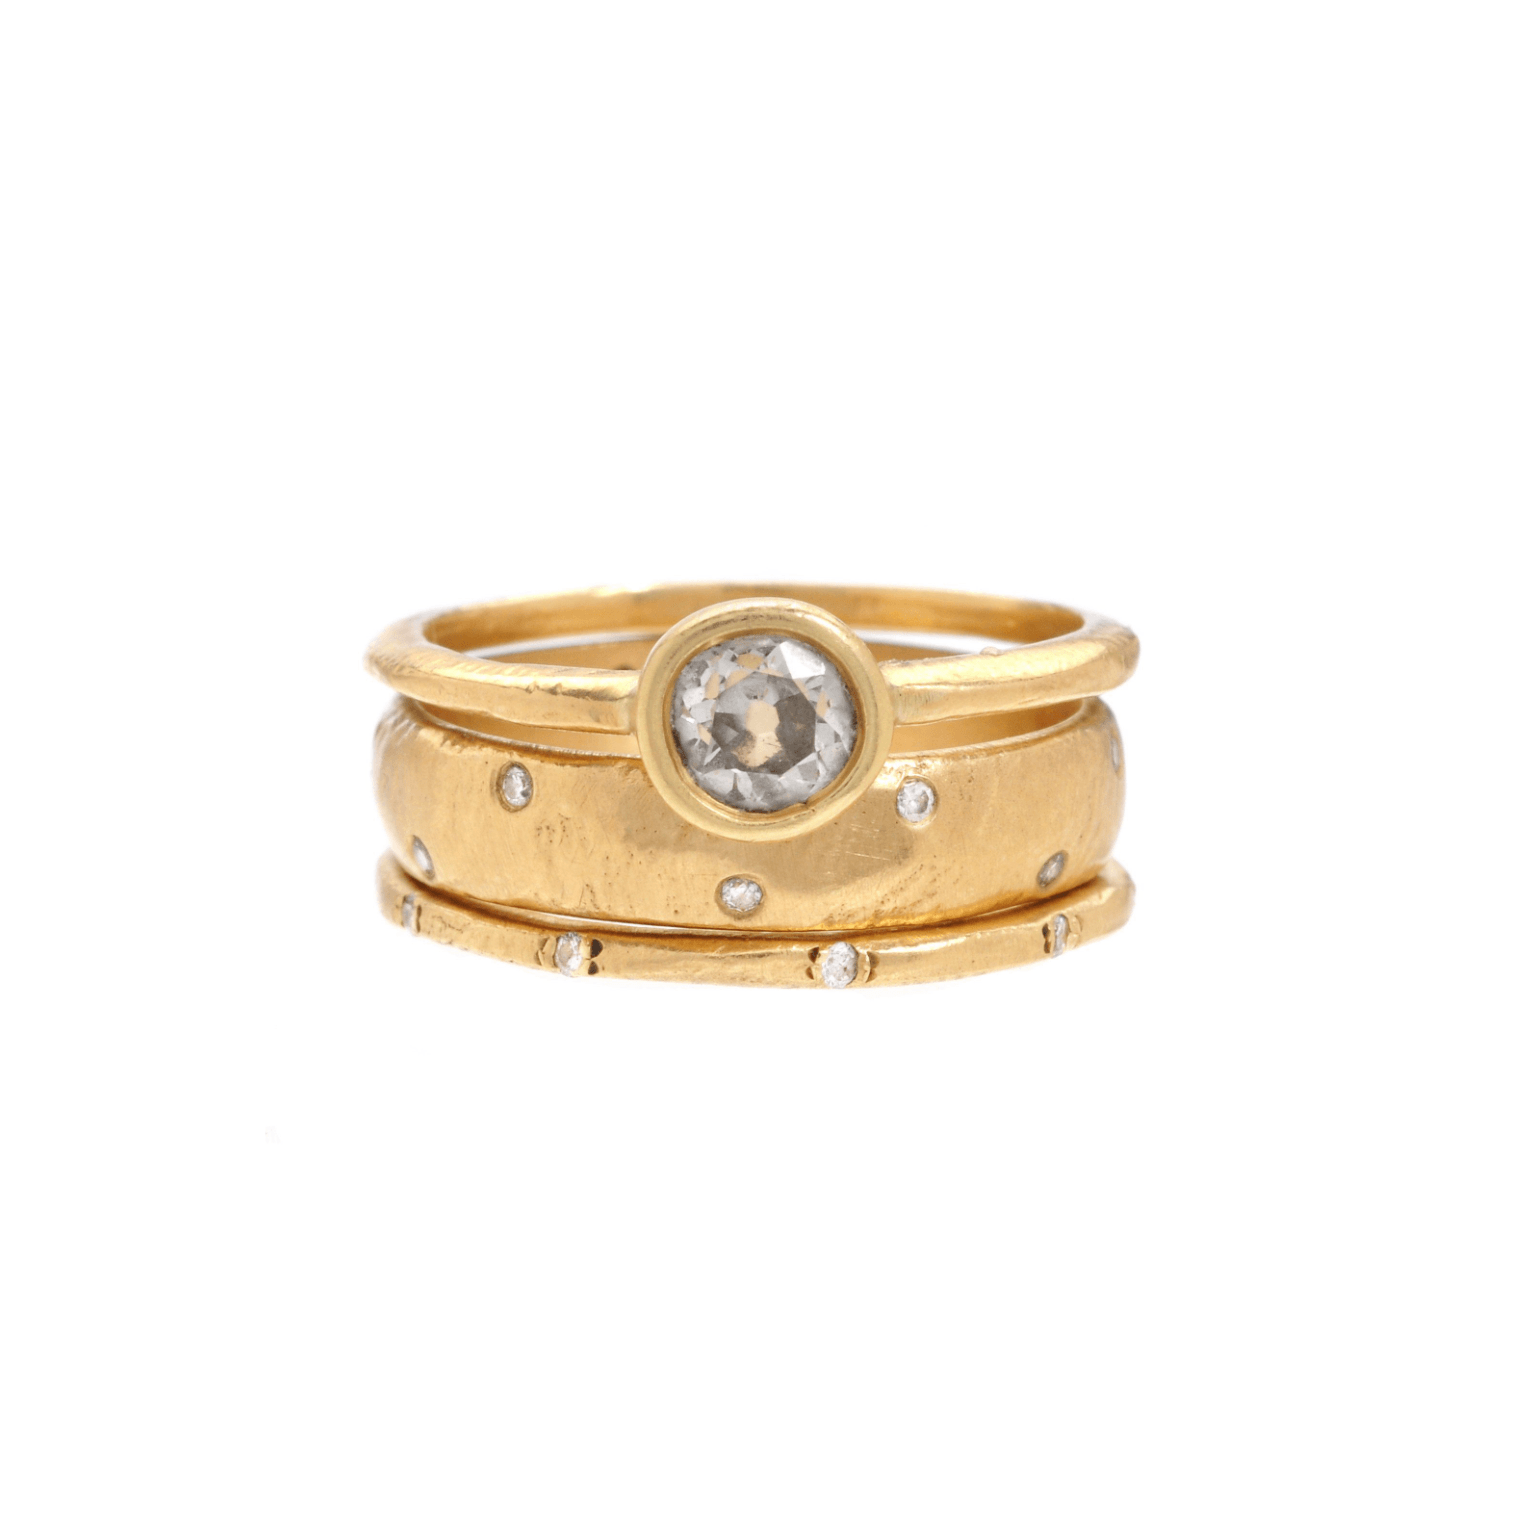 Handmade 18kt gold ring stack. Diamond engagement ring with two diamond wedding bands.